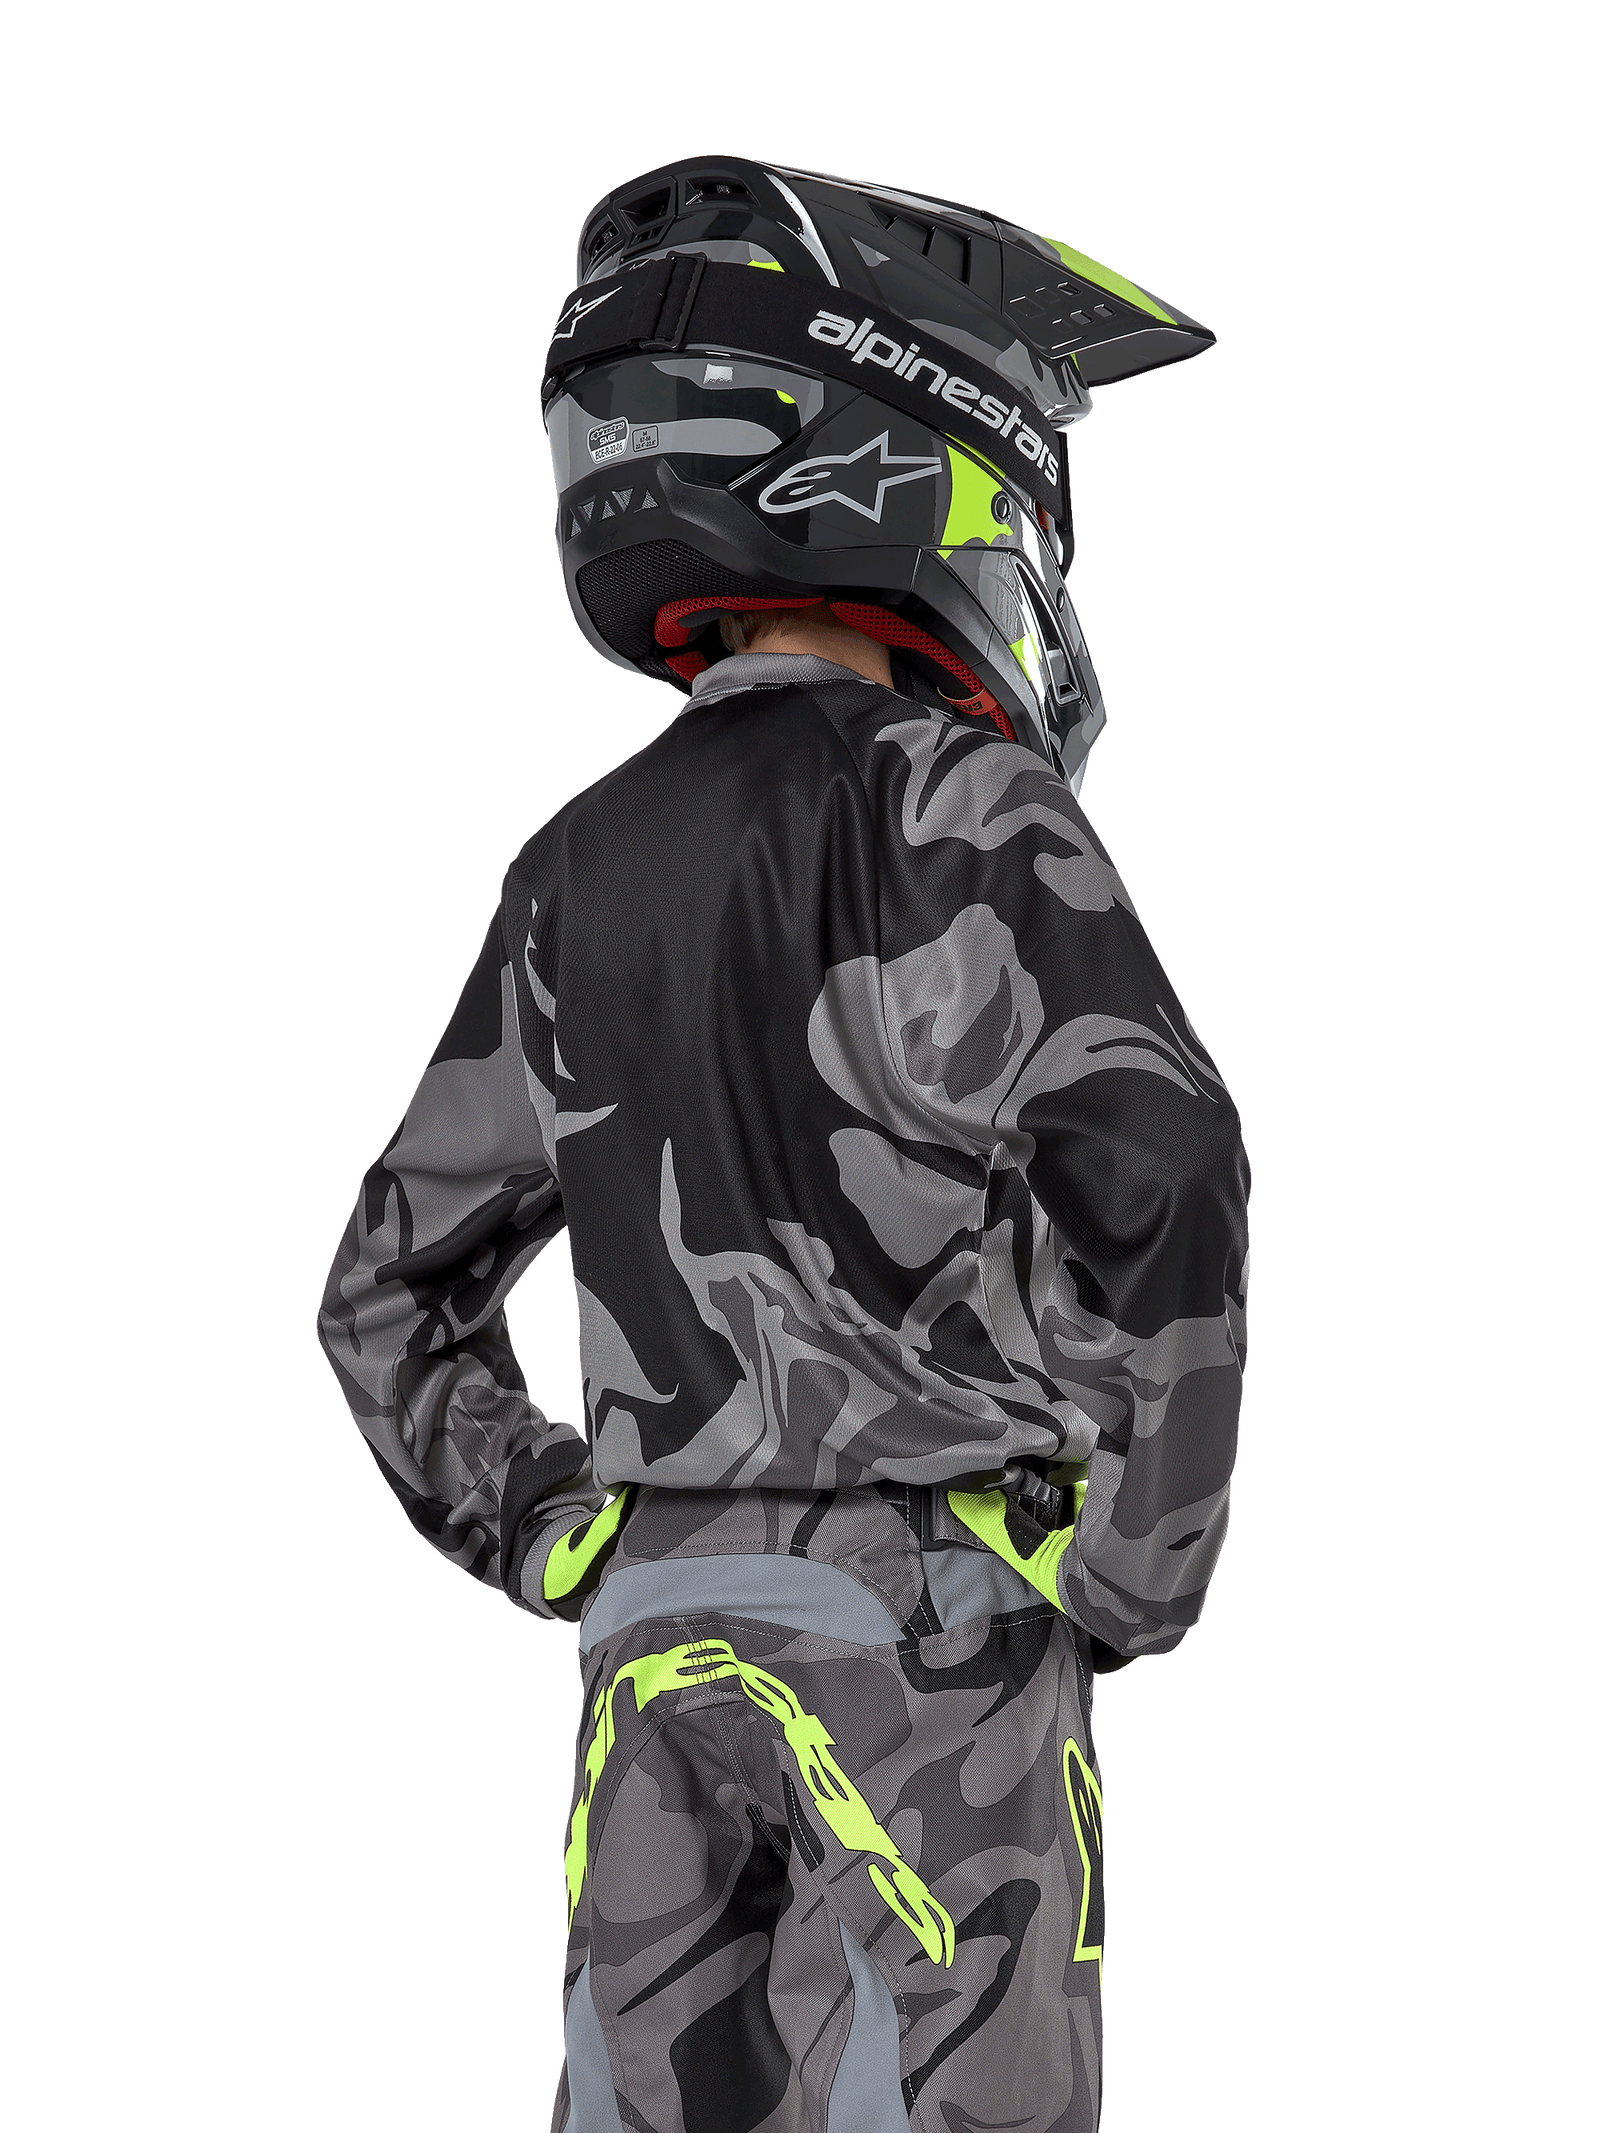 MX24 Collection | Alpinestars® Official Site